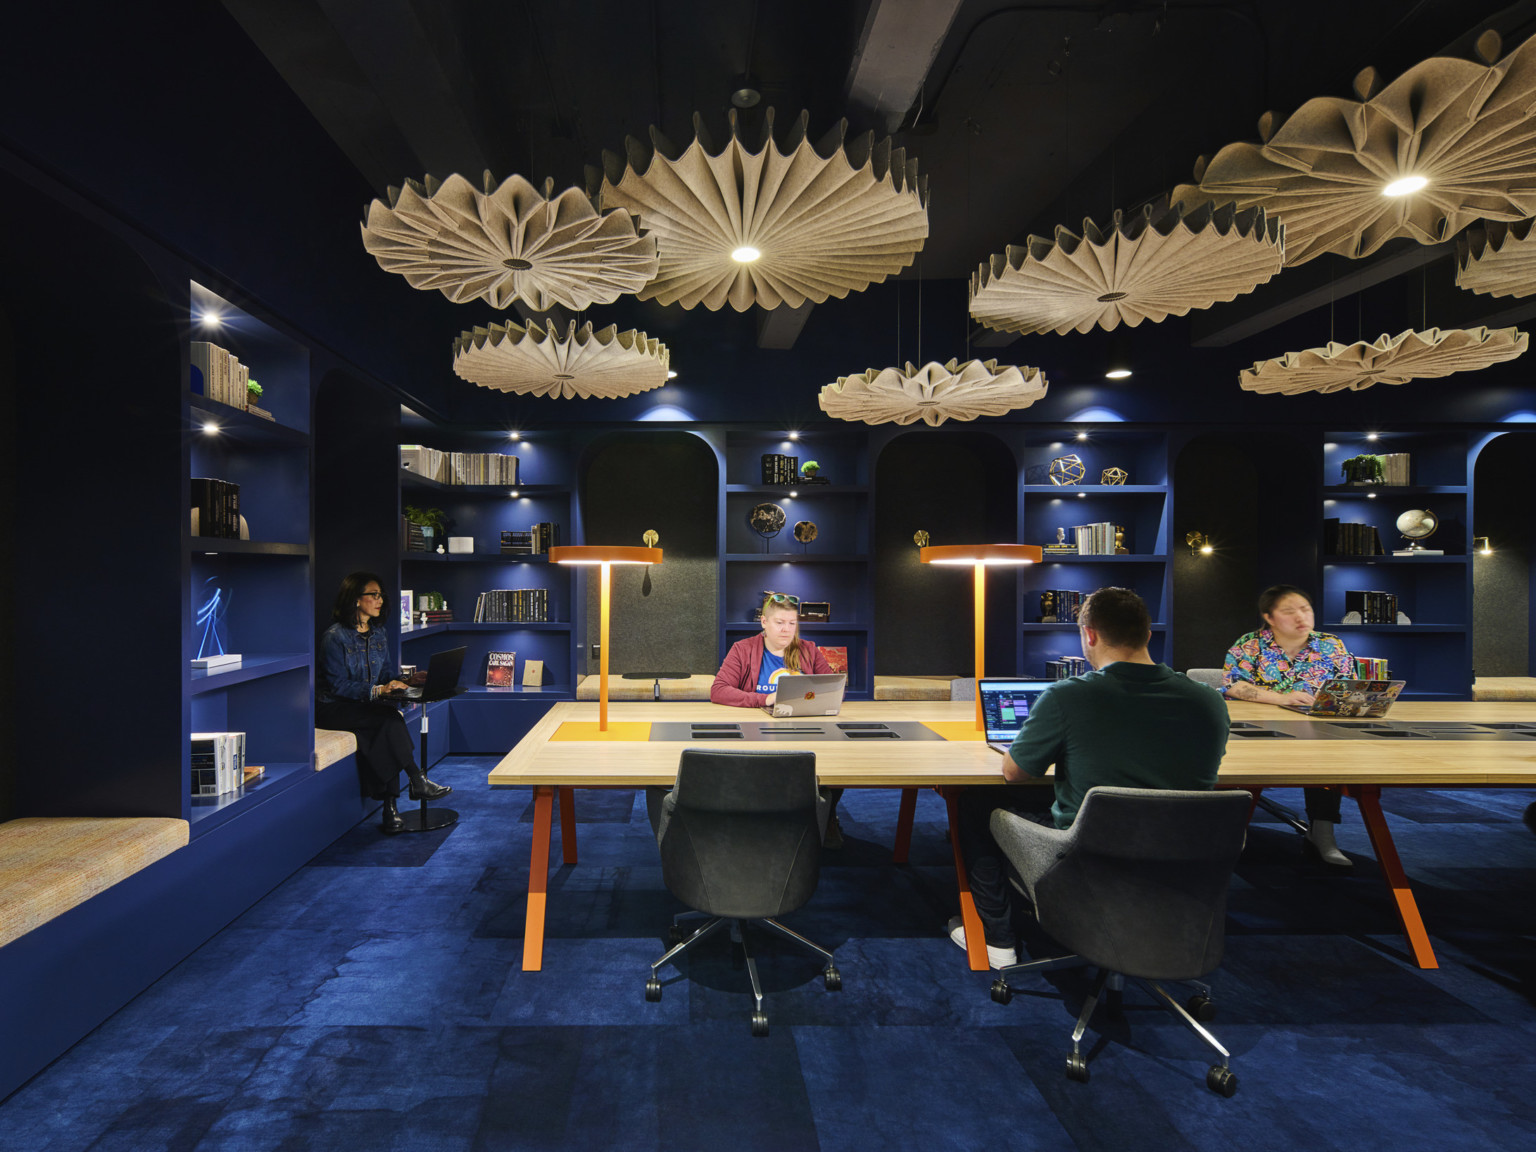 Blue room office common space with long table with built in lights. Sculptural organically shaped illuminated beige accents hang